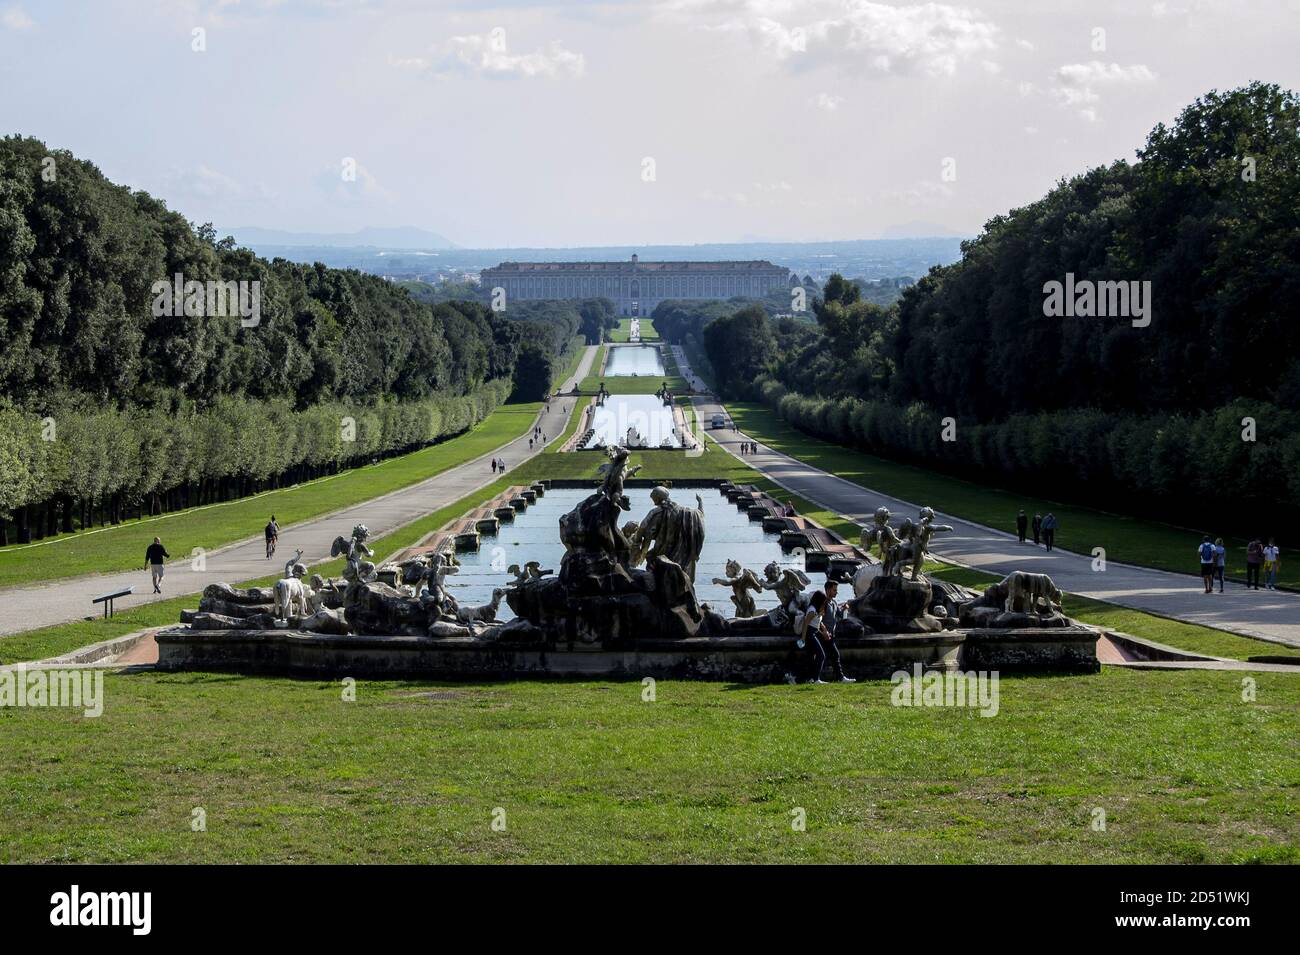 Caserta, Italy. 10th Oct, 2020. The park of the Royal Palace of Caserta, a historic royal palace with an adjoining park, is located in Caserta. It was commissioned in the 18th century by Carlo di Borbone, king of Naples and Sicily, based on a project by Luigi Vanvitelli. It occupies an area of 47,000 m² (Photo by Patrizia Cortellessa/Pacific Press) Credit: Pacific Press Media Production Corp./Alamy Live News Stock Photo